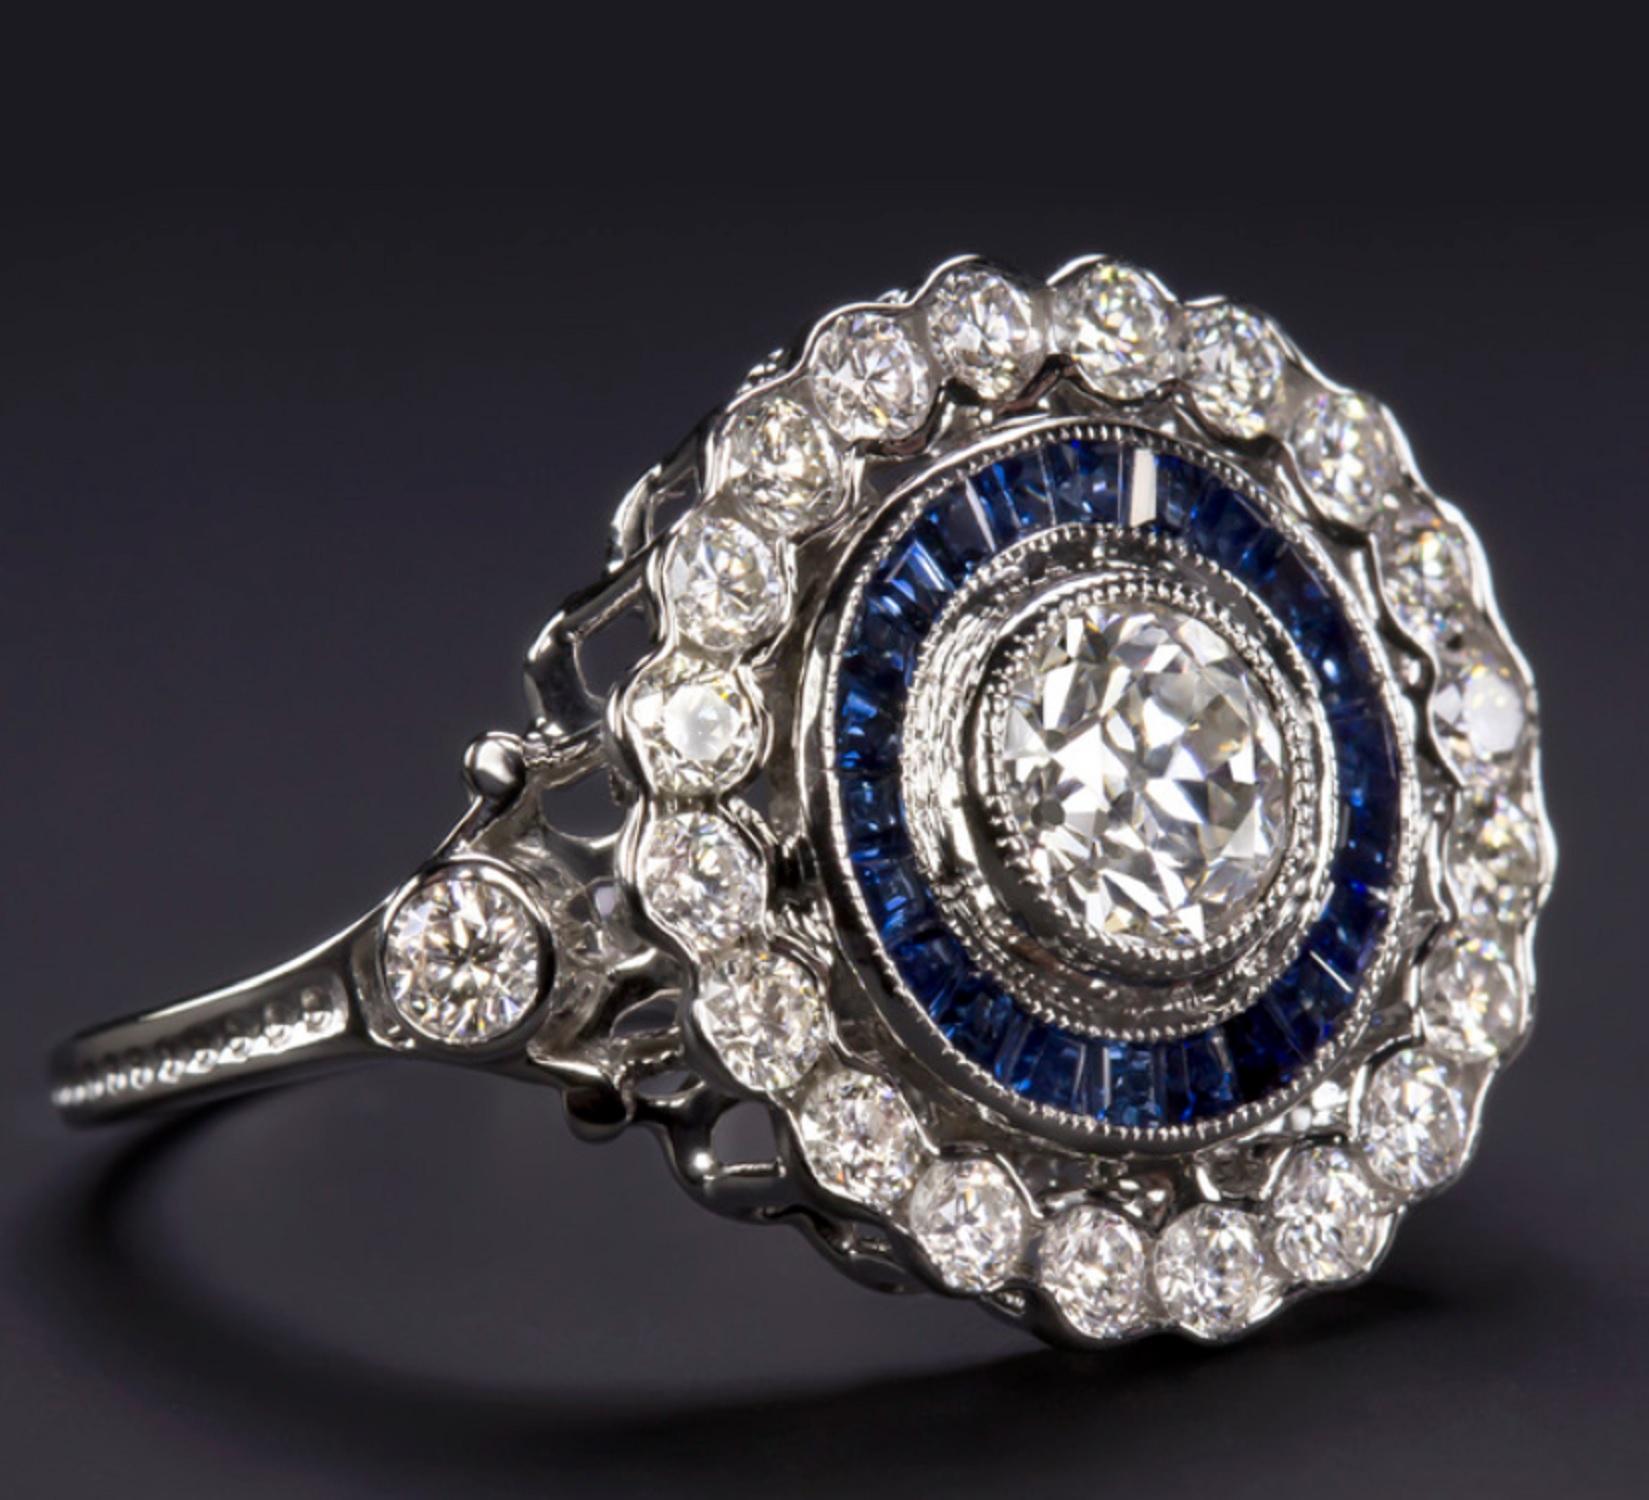 An exquisite ring composed by a GIA certified diamond with a halo of very well saturated blue sapphires and another halo of round brilliant cut diamonds all very pure and bright!

The ring is really well made with an excellent quality 